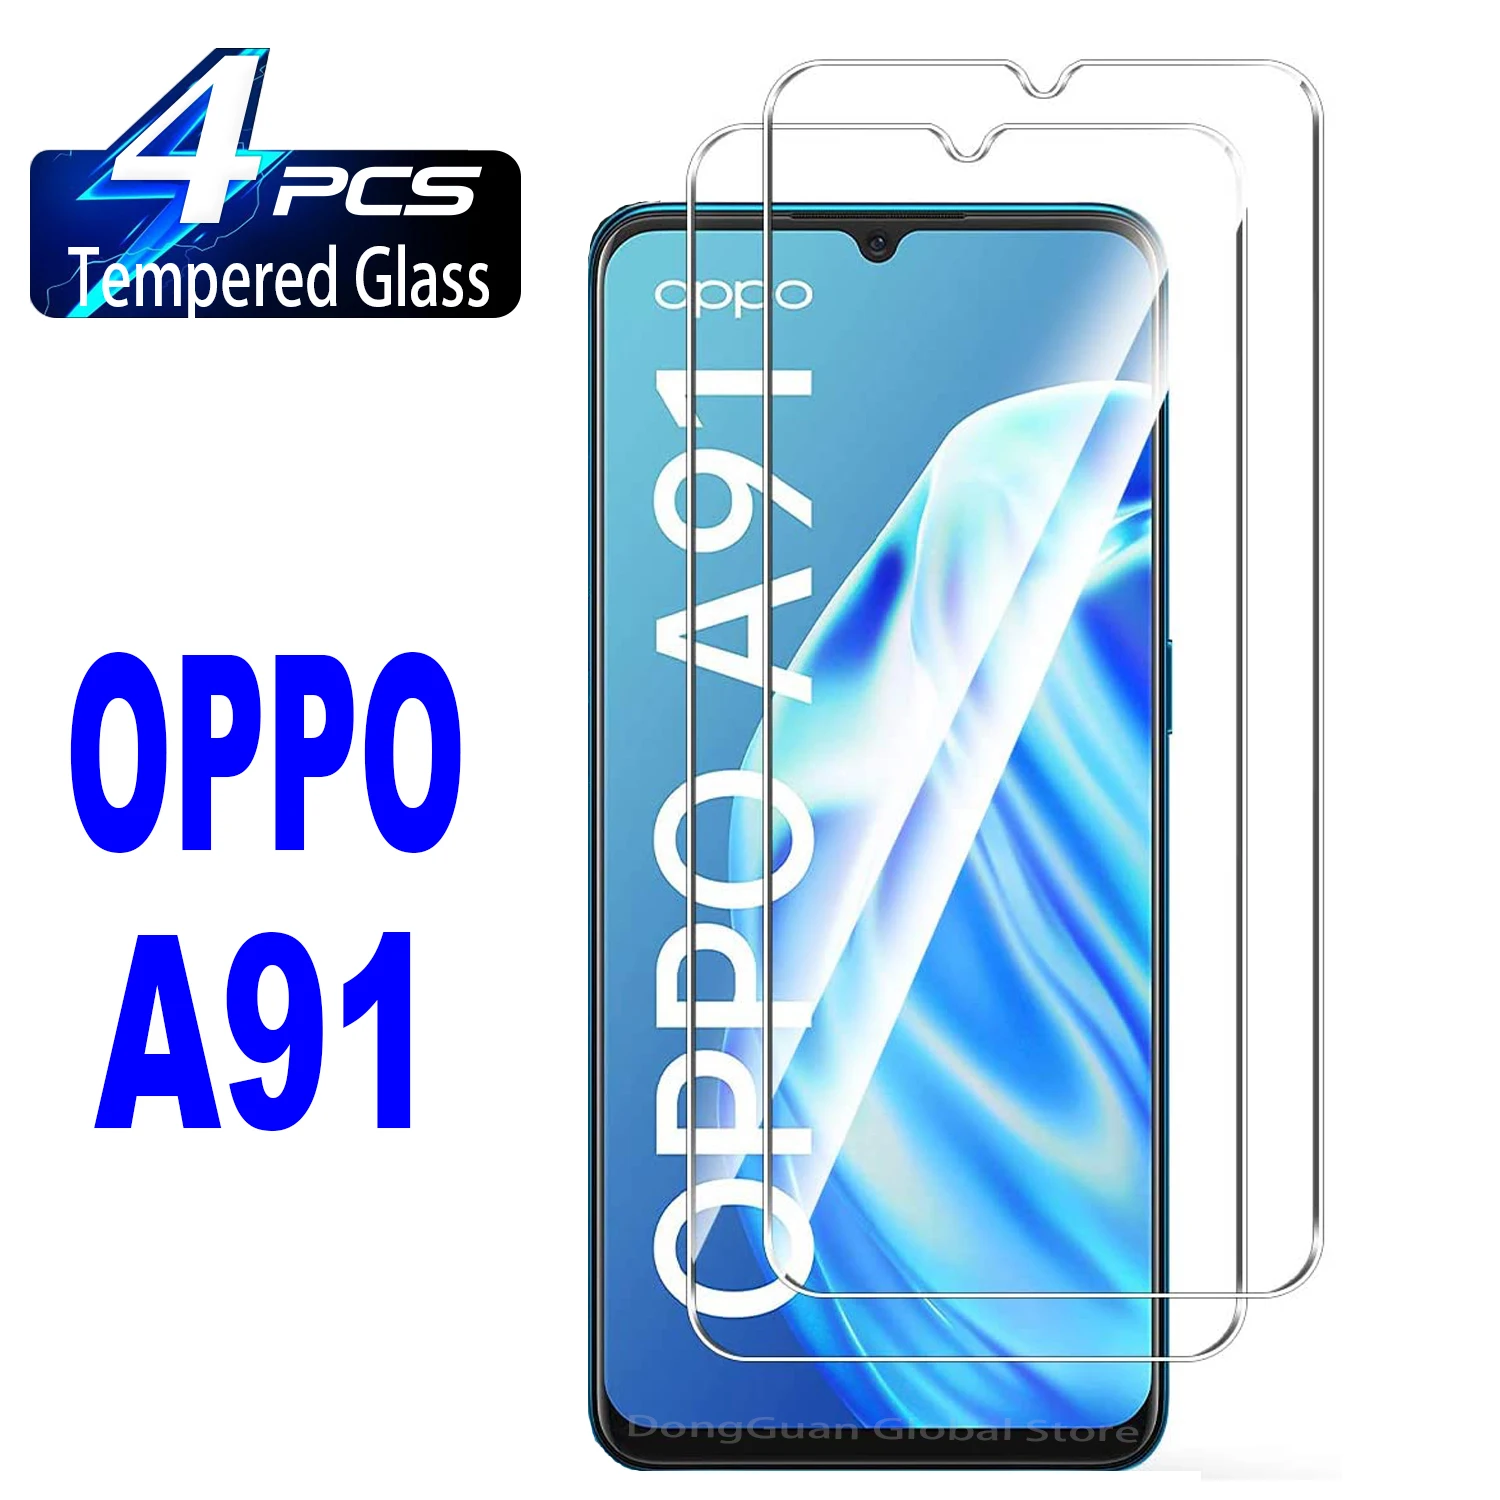 2/4Pcs Tempered Glass For OPPO A91 Screen Protector Glass Film 2 4pcs tempered glass for motorola moto g24 screen protector glass film